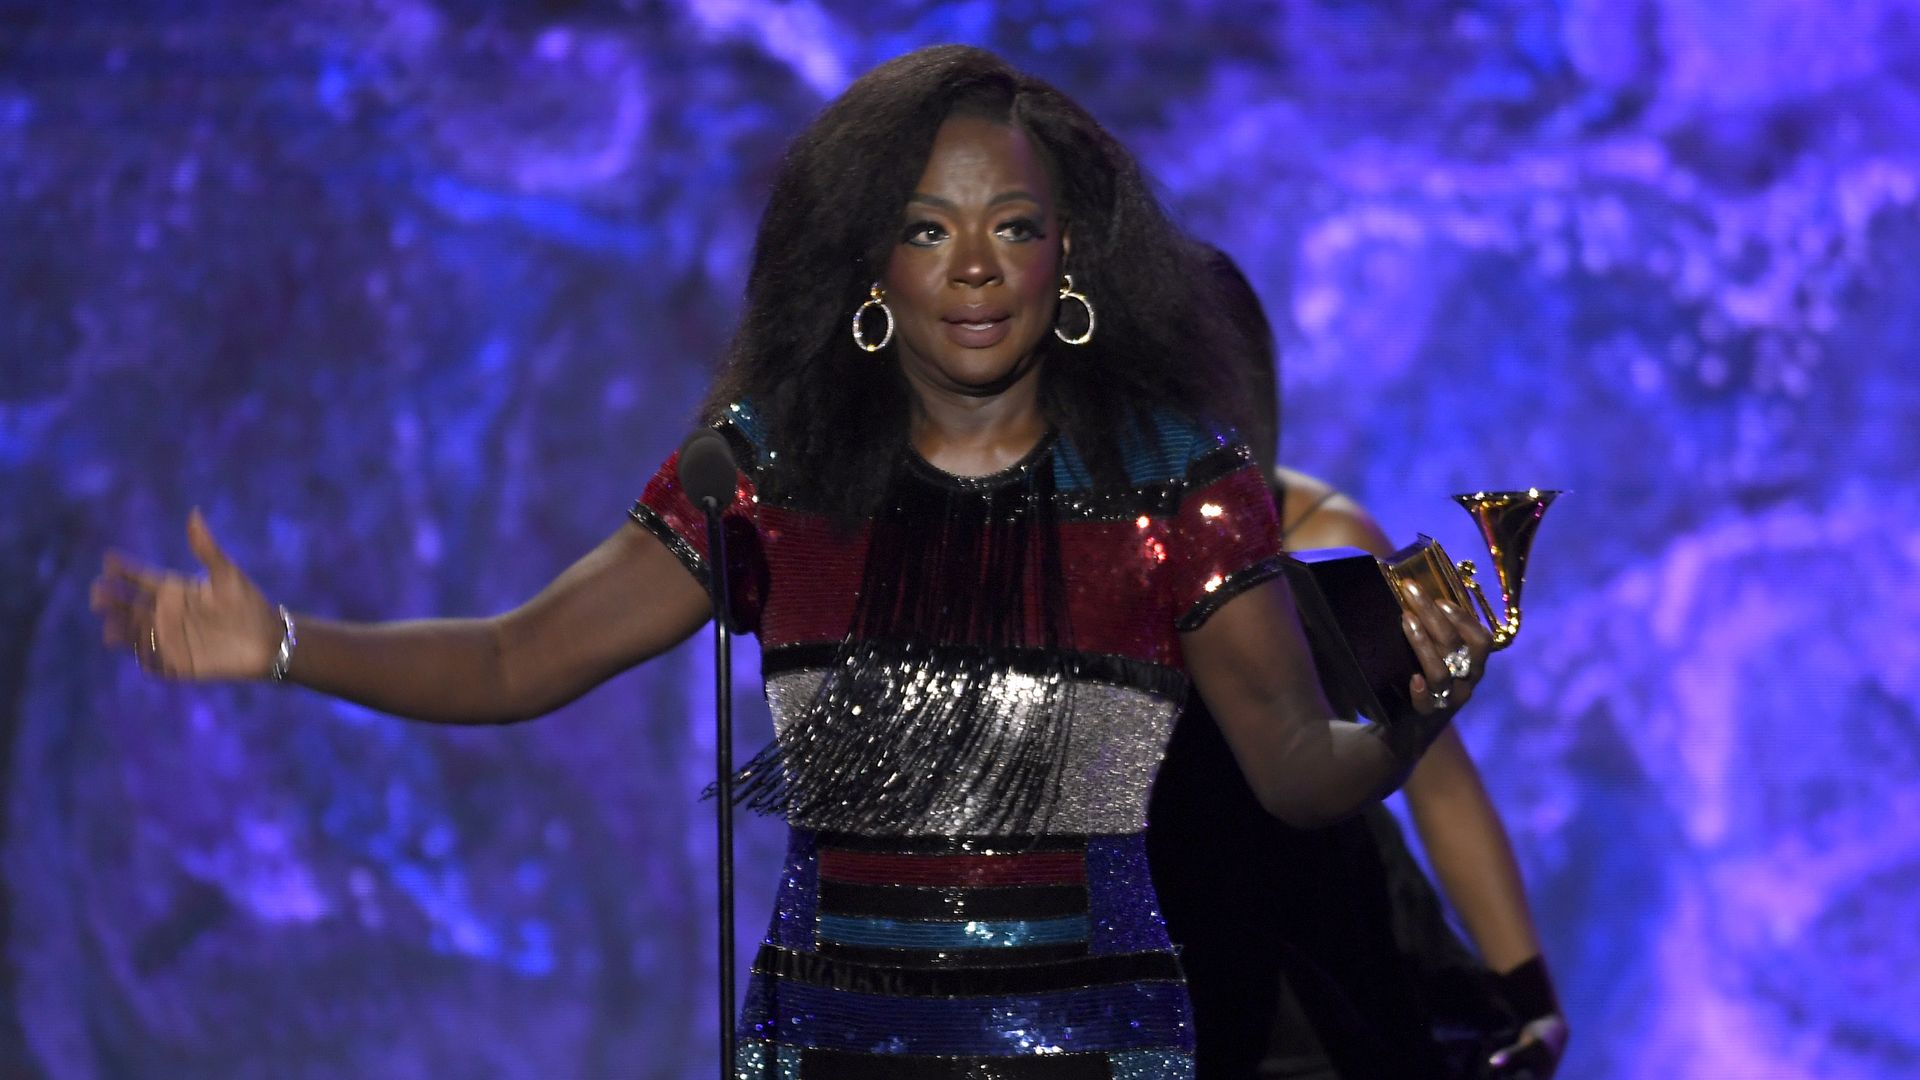 Viola Davis accepts the Audio Book, Narration and Storytelling Recording award for Finding Me during the 65th GRAMMY Awards on February 05, 2023 in Los Angeles, California.